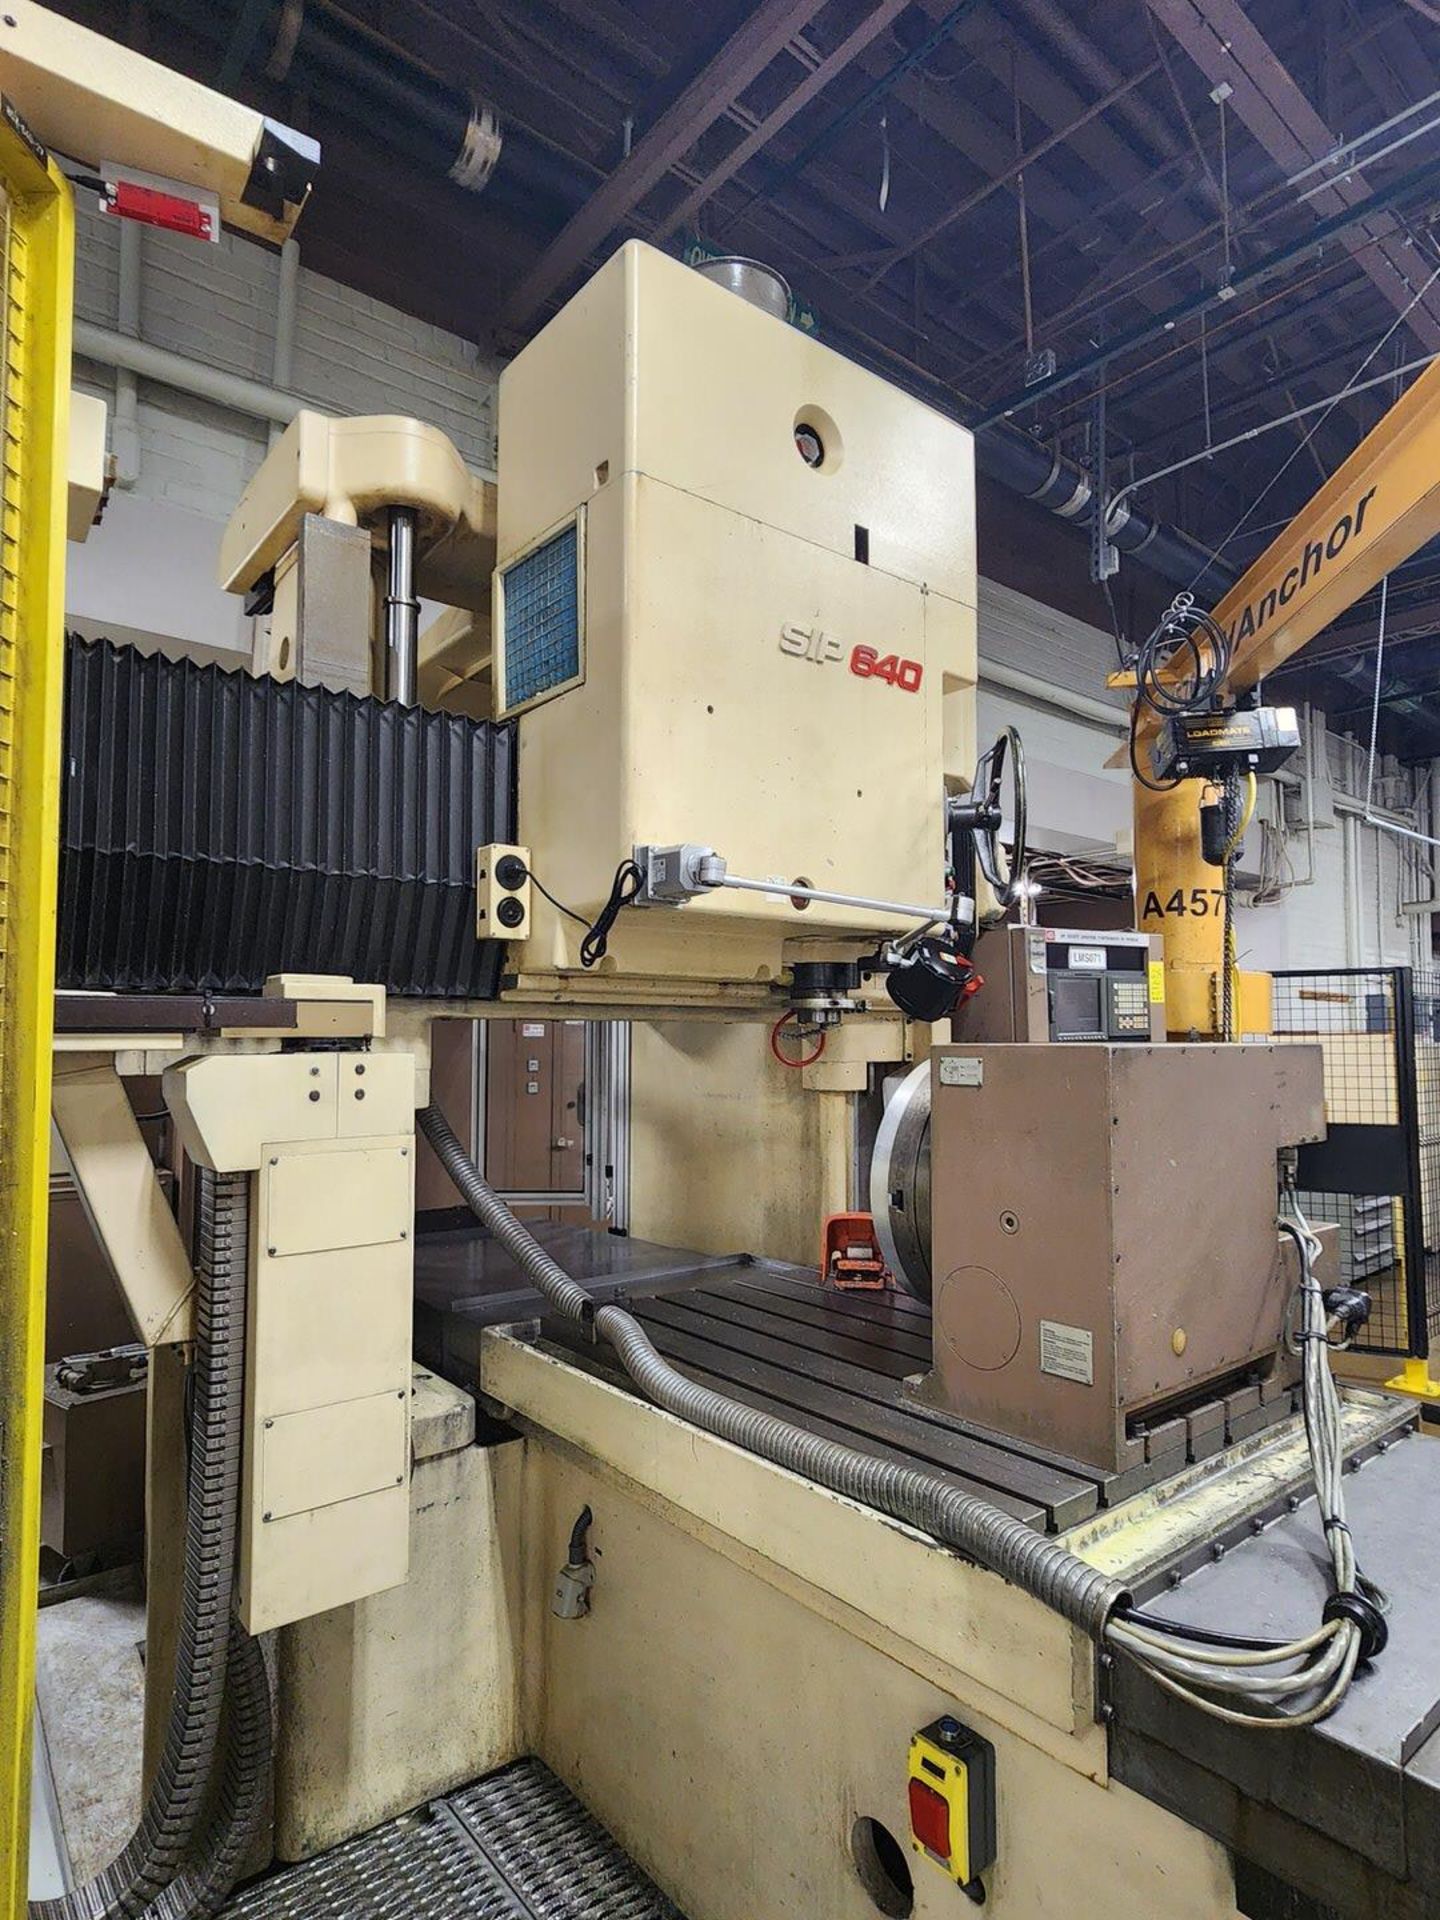 SIP SIP-640 Jig Boring Machine W/ Fanuc Series 16i-M Controller; Cutting Time: 15,304hrs - Image 7 of 36